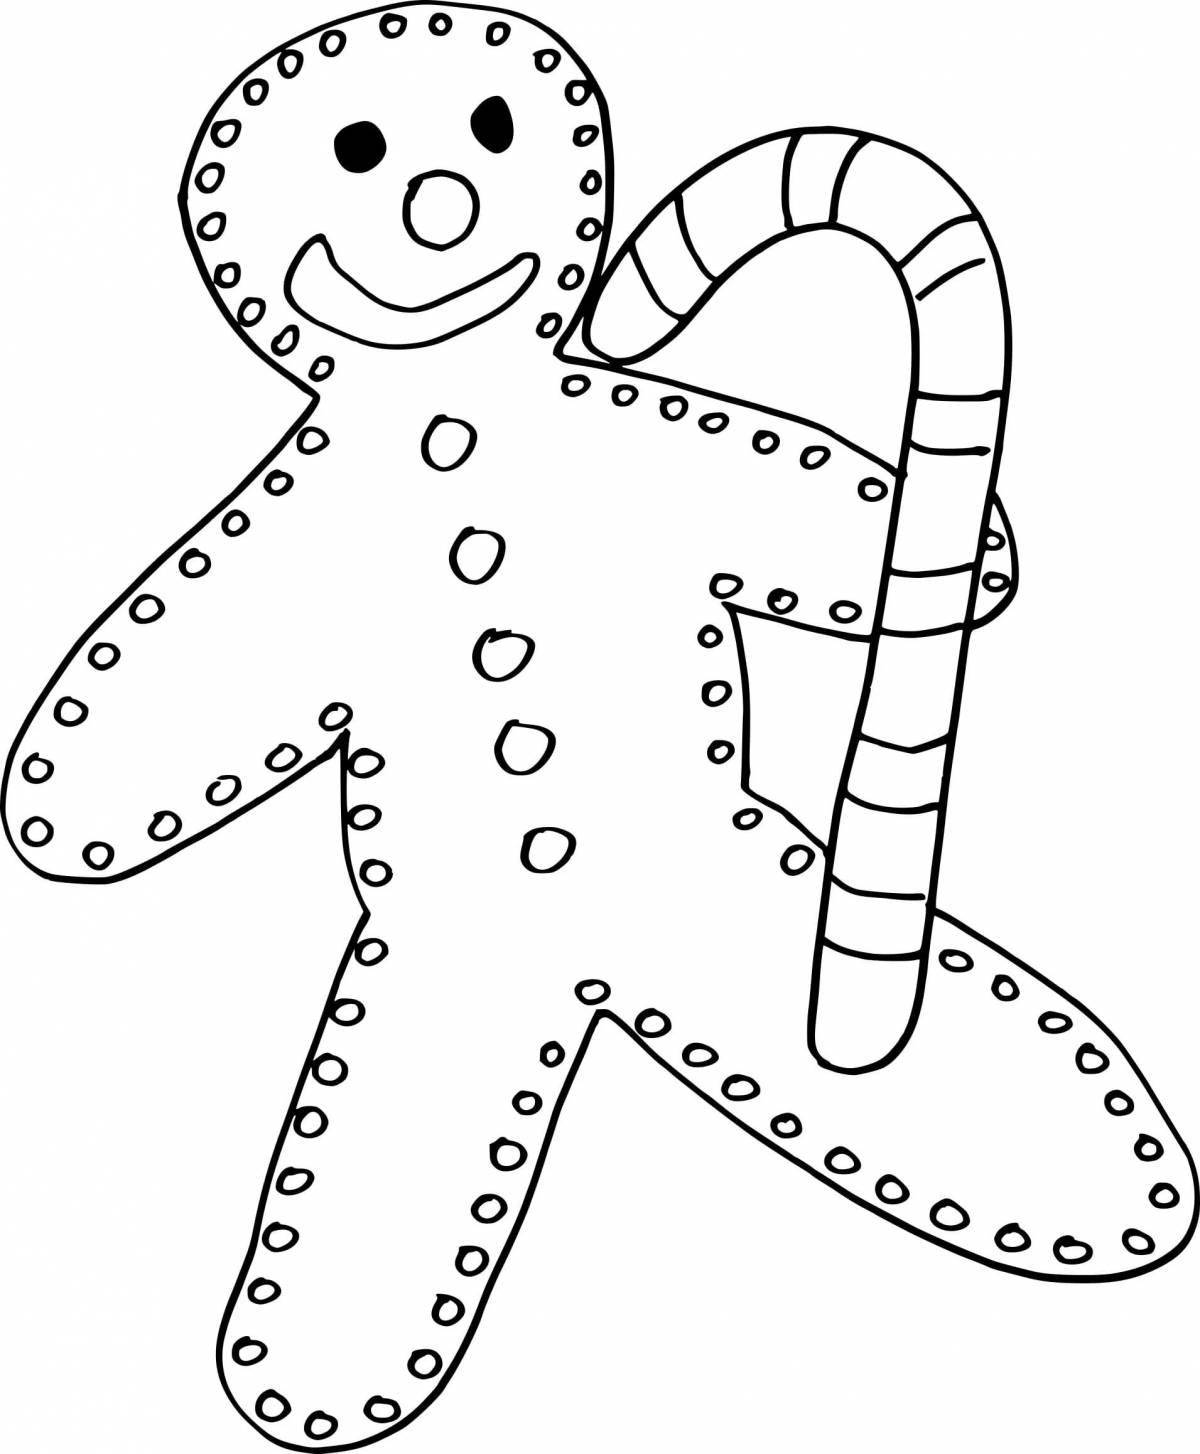 Coloring page charming gingerbread man